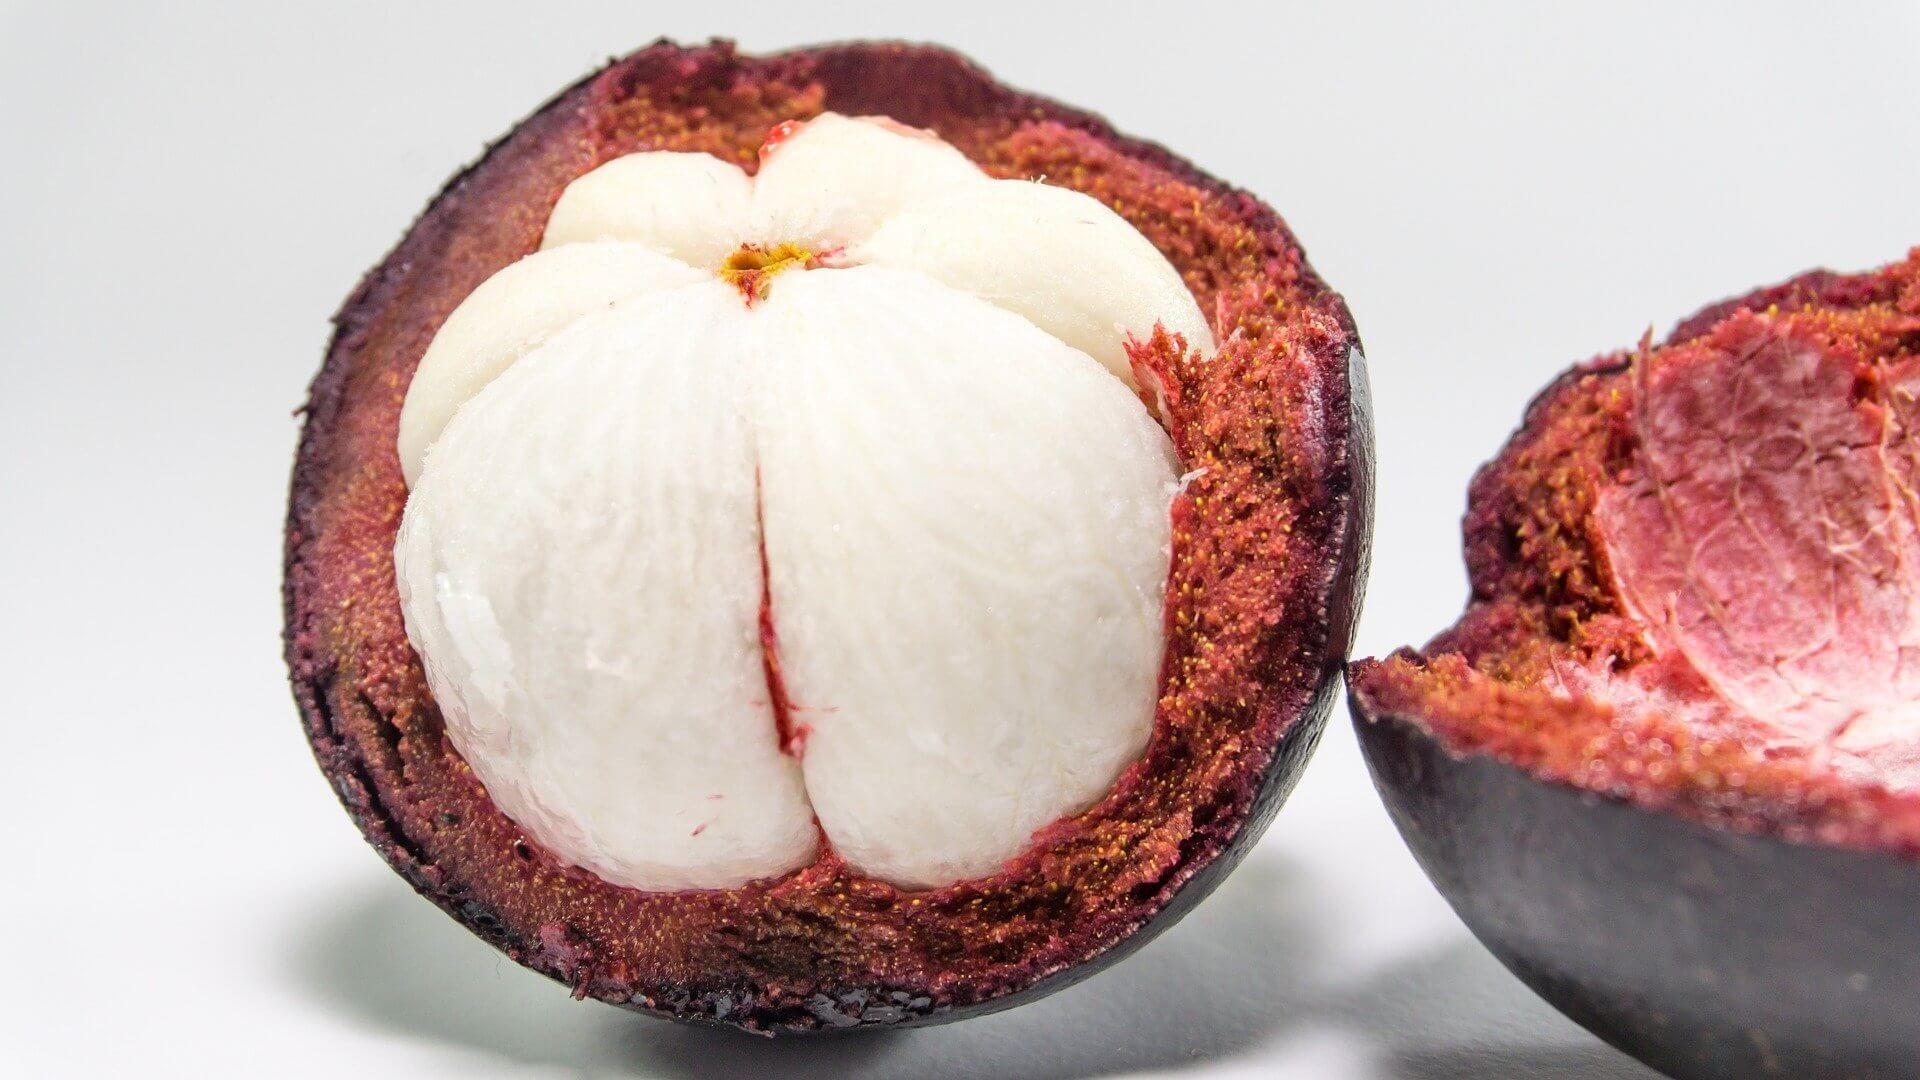 Mangosteen: Used as a natural remedy for digestive issues, skin conditions, and allergies. 1920x1080 Full HD Wallpaper.